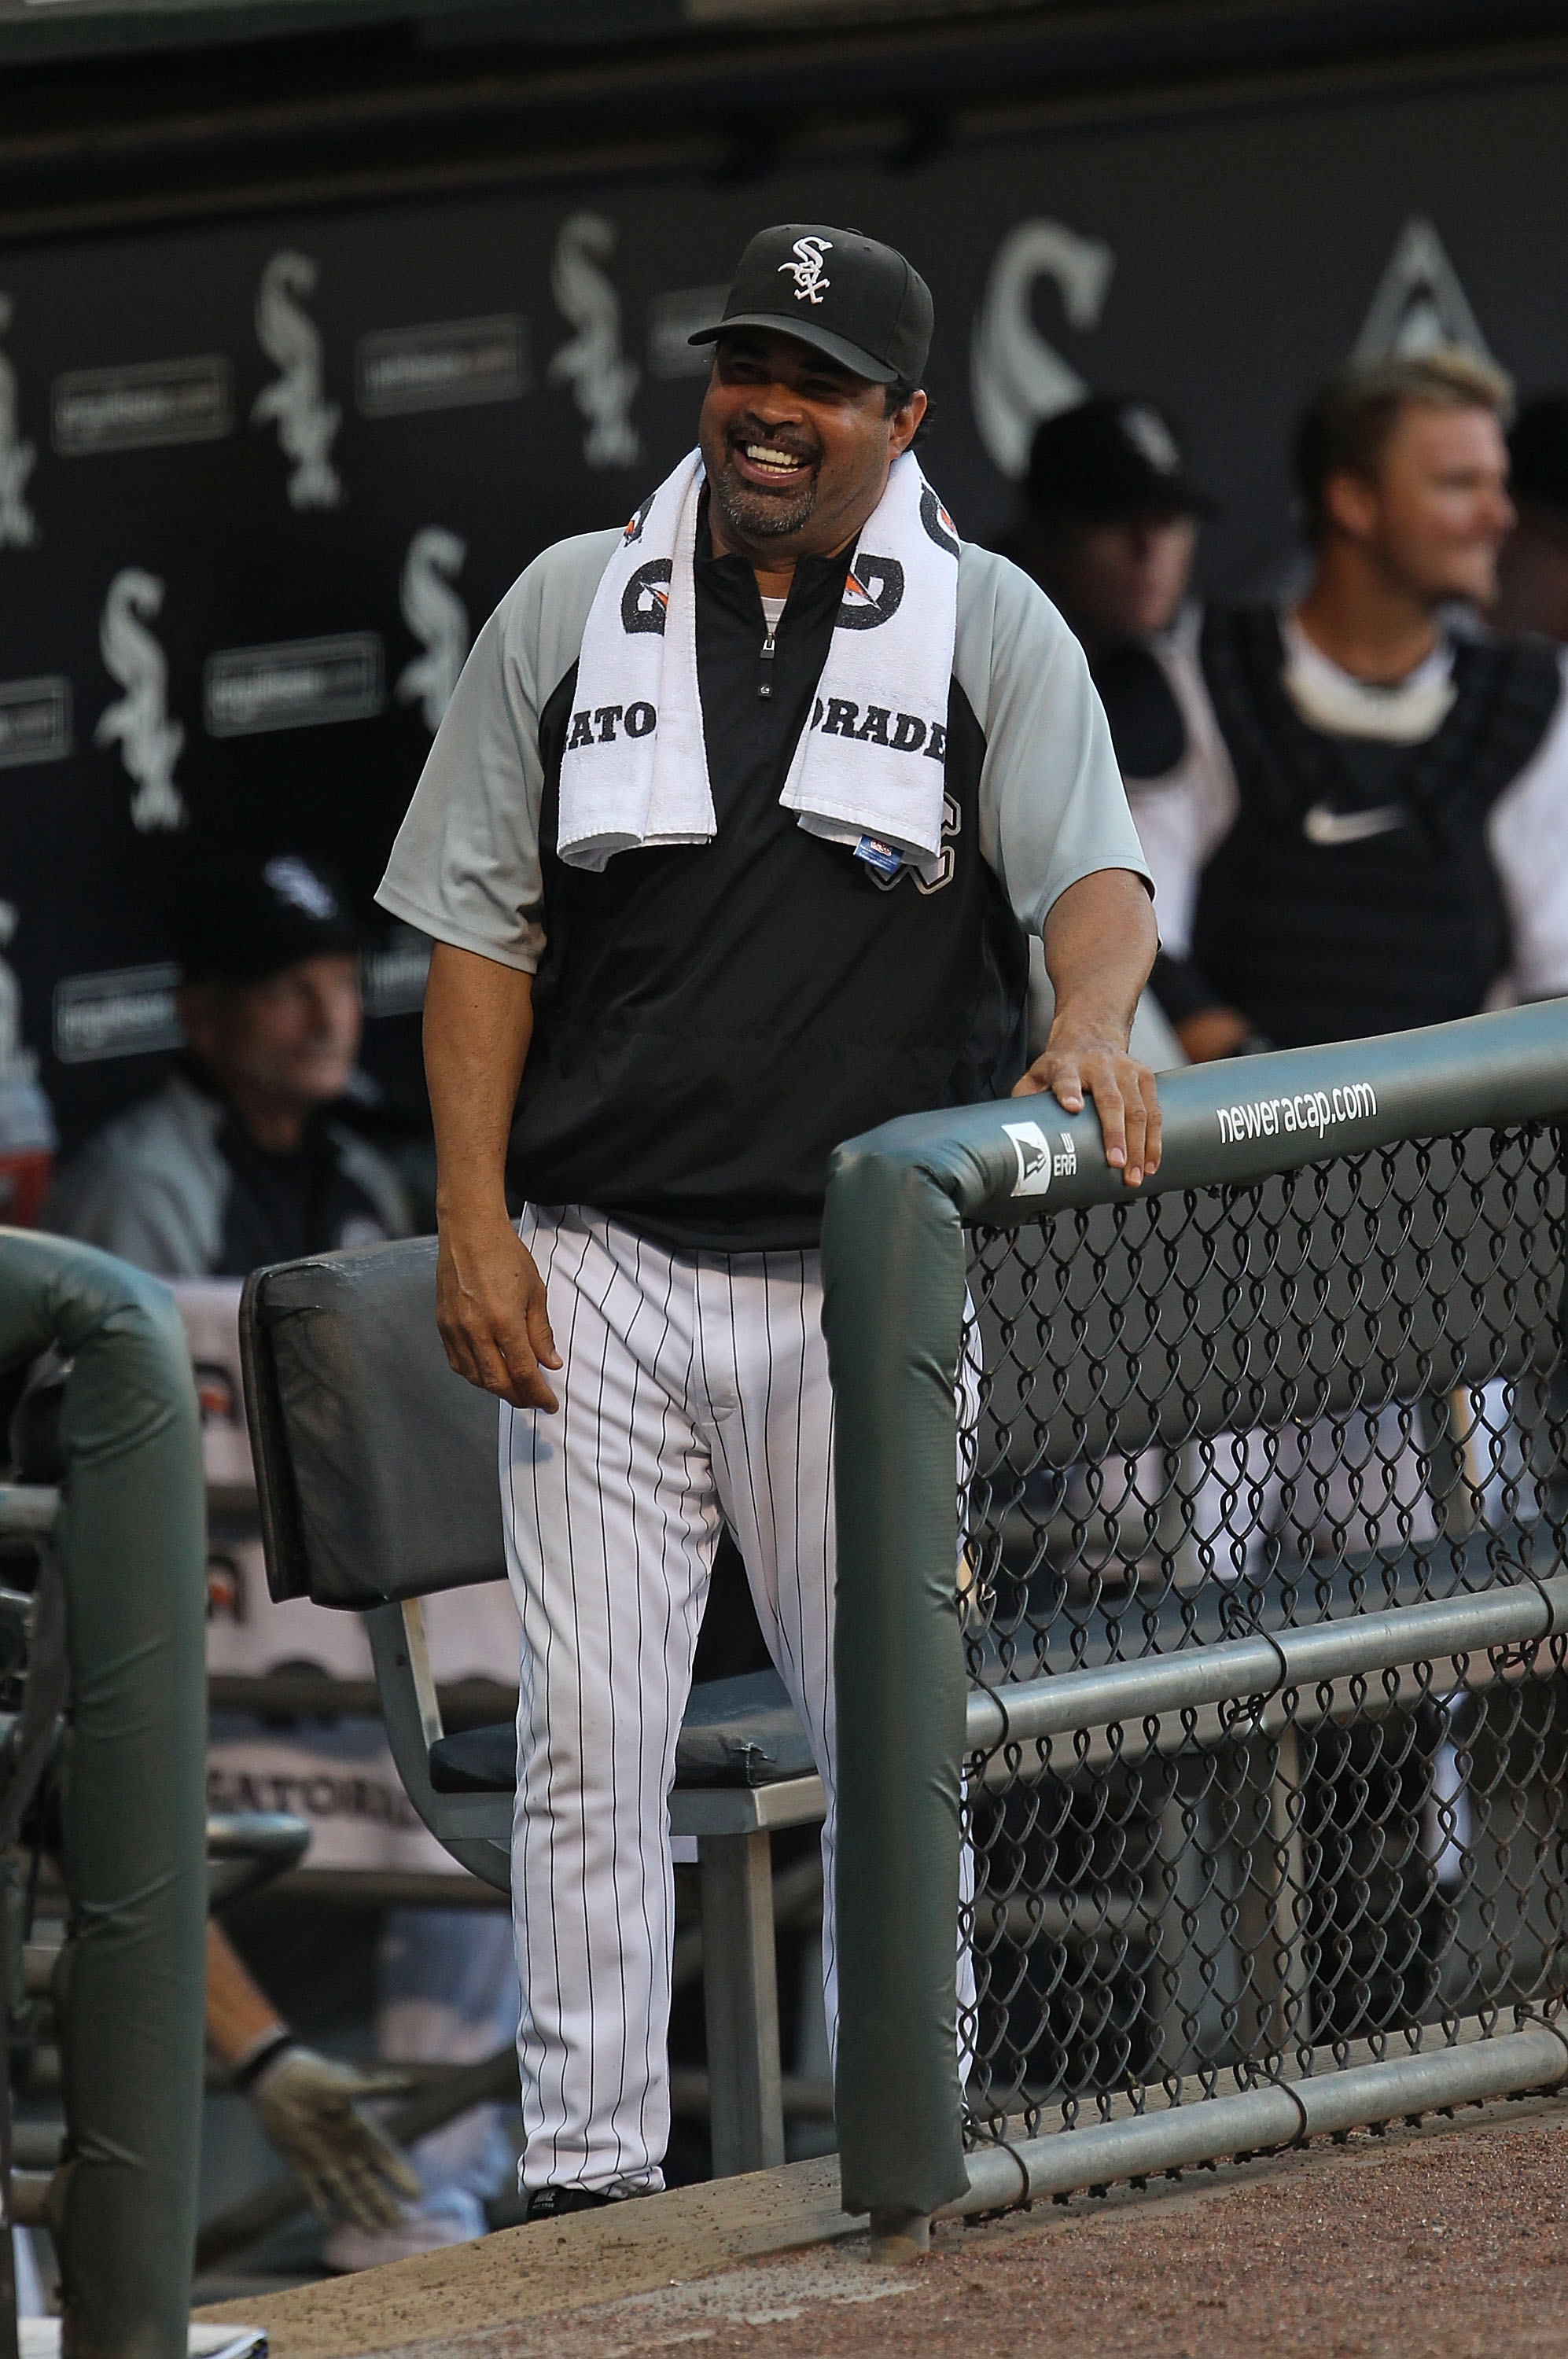 CHICAGO - JULY 26: Manager Ozzie Guillen #13 of the Chicago White Sox jokes with fans before the start of a game against the Seattle Mariners at U.S. Cellular Field on July 26, 2010 in Chicago, Illinois. The White Sox defeated the Mariners 6-1. (Photo by